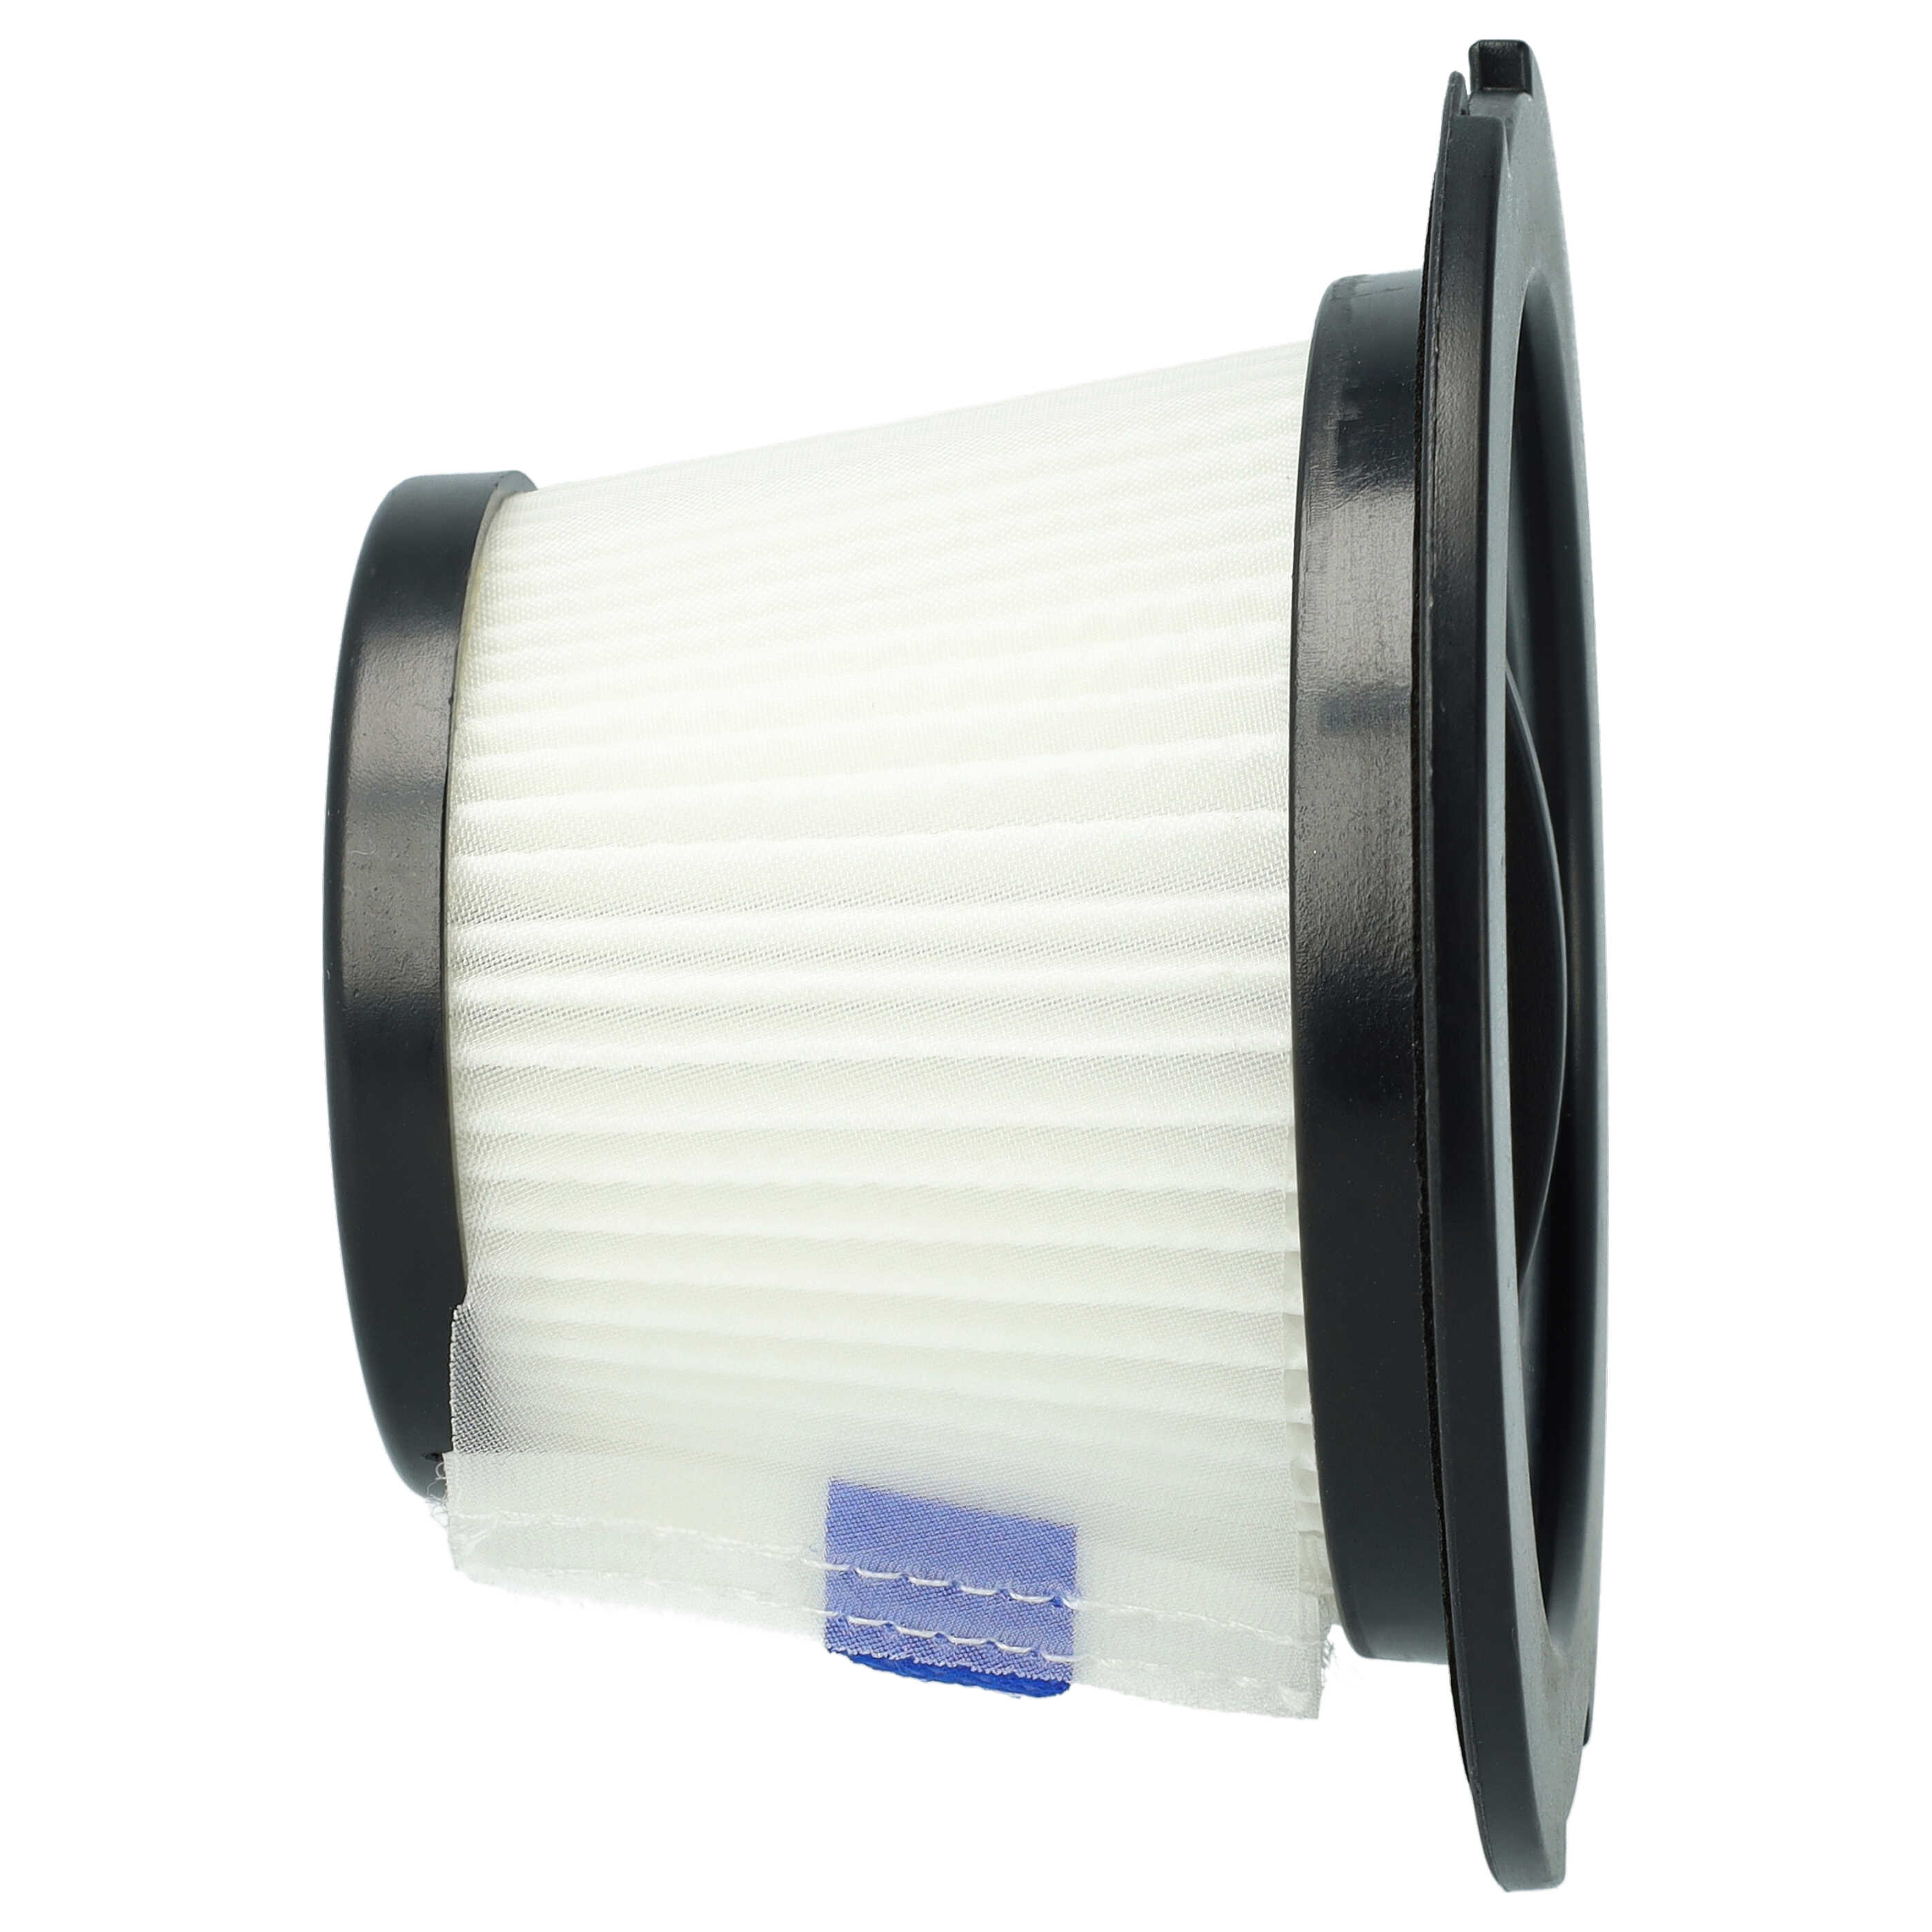 2x filter suitable for Clean Butler 4G Silent 10033762, Clean Butler 4G Silent 10033763, K17, UVC-122311.3 Kla